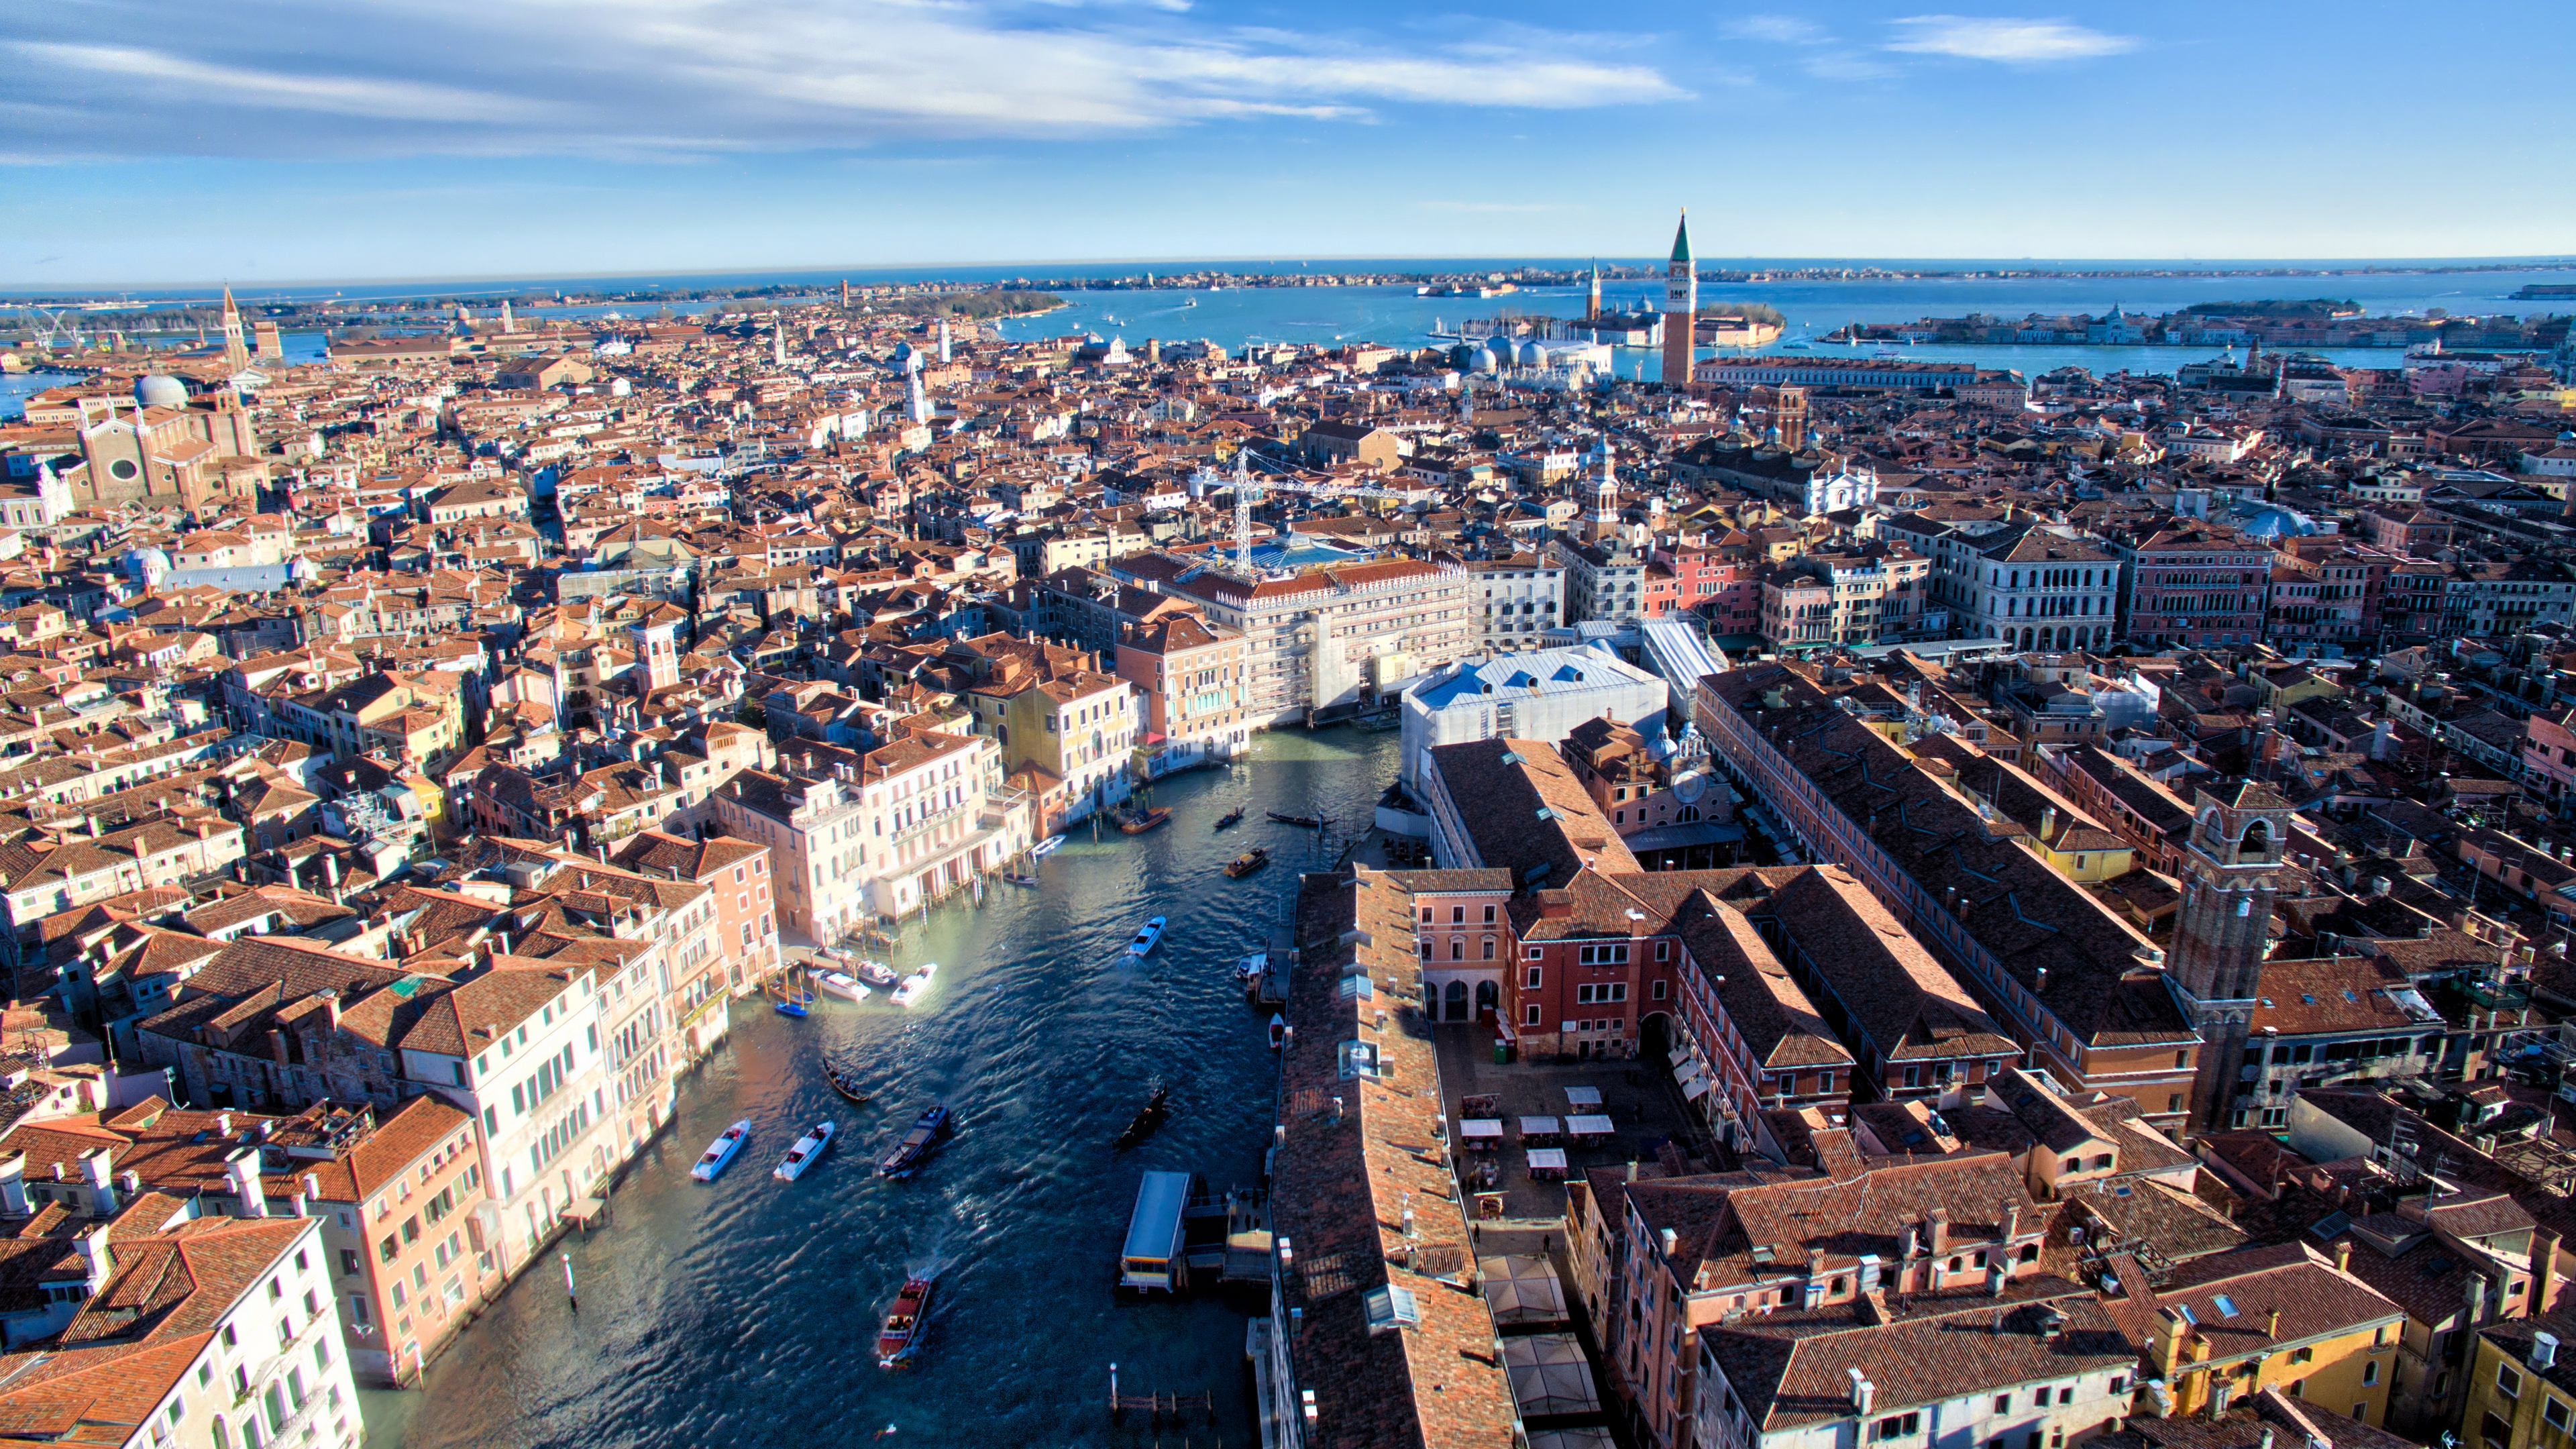 General 3840x2160 cityscape building tower water boat Italy Venice landscape aerial view panorama canal sea horizon sky